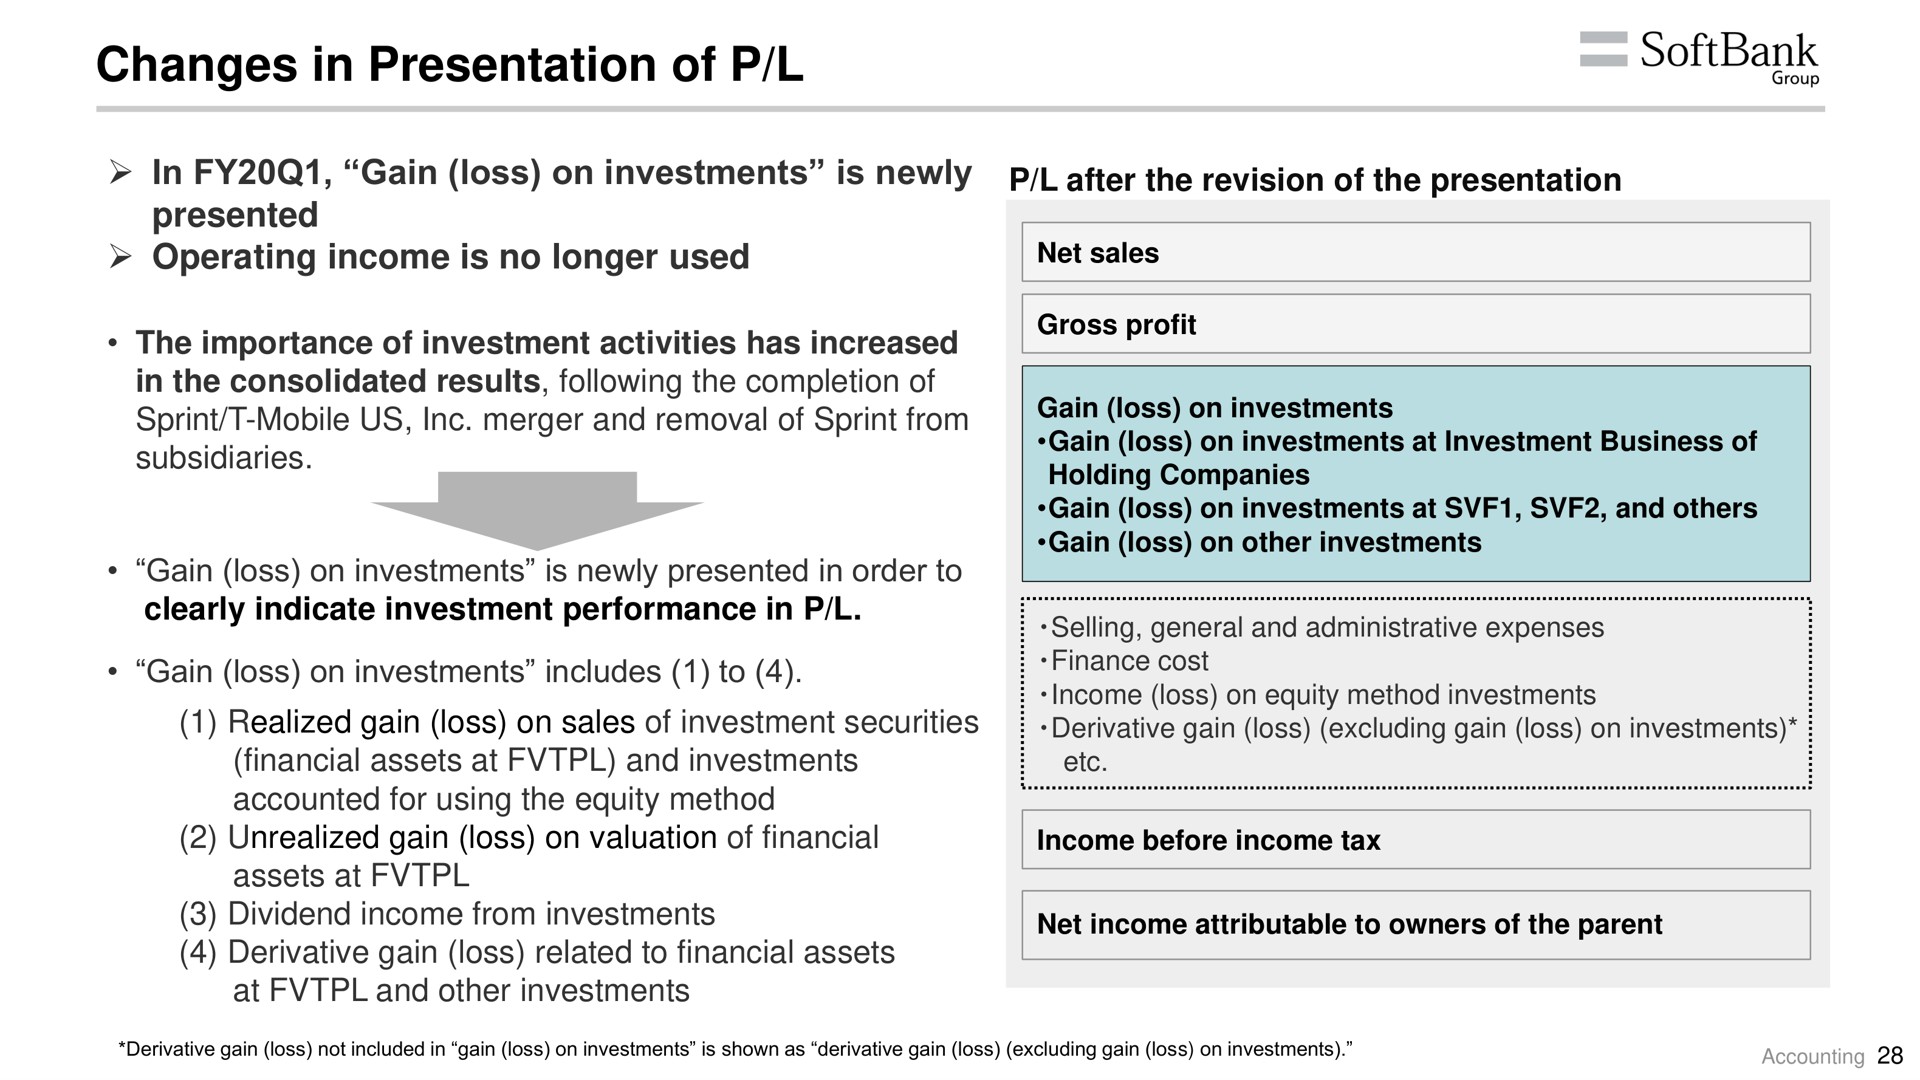 changes in presentation of gain loss on investments is newly after the revision the | SoftBank